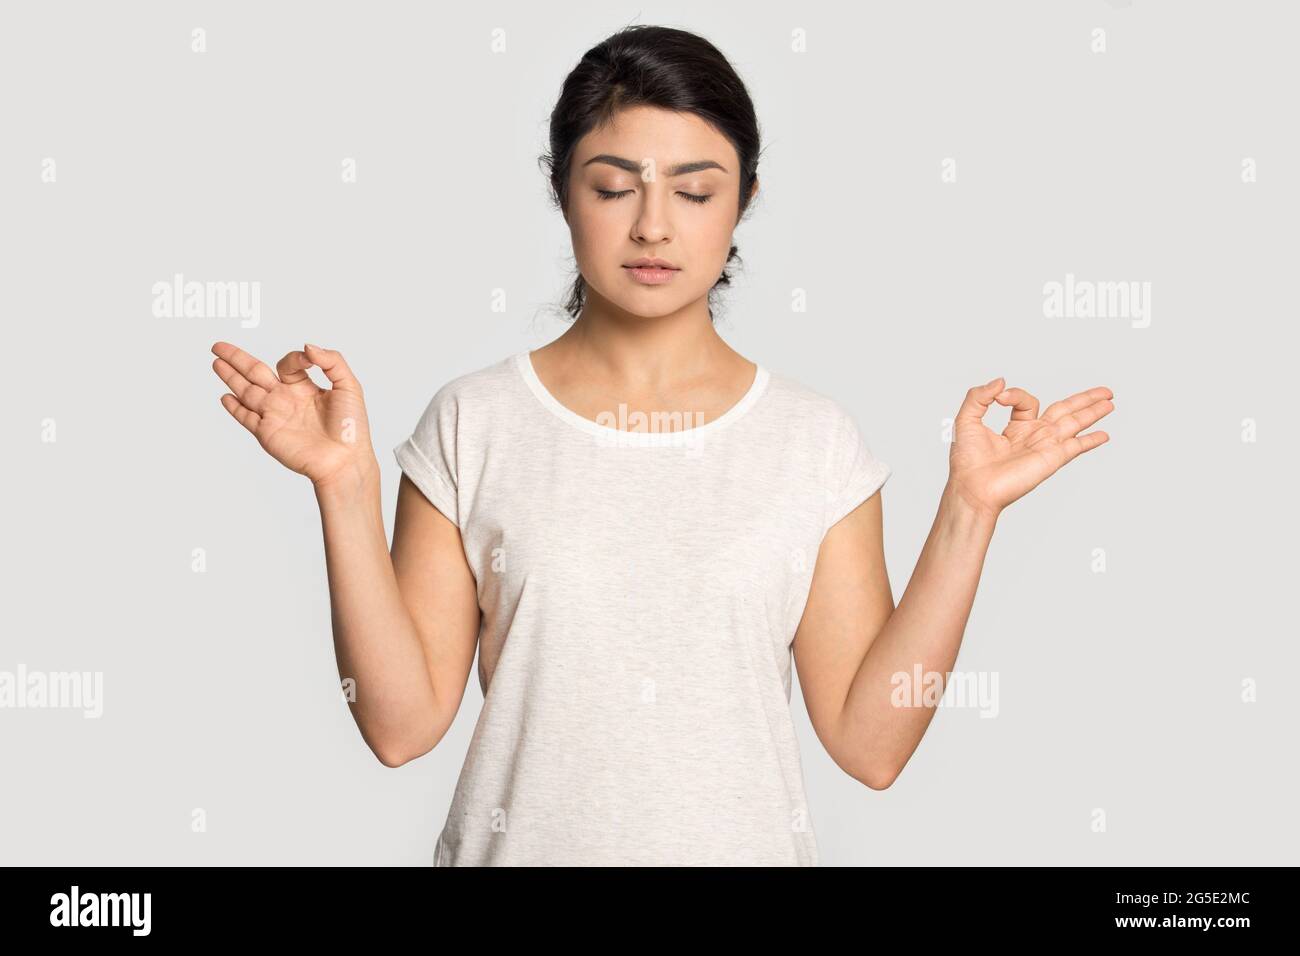 Calm Indian woman practice yoga relieving negativity Stock Photo